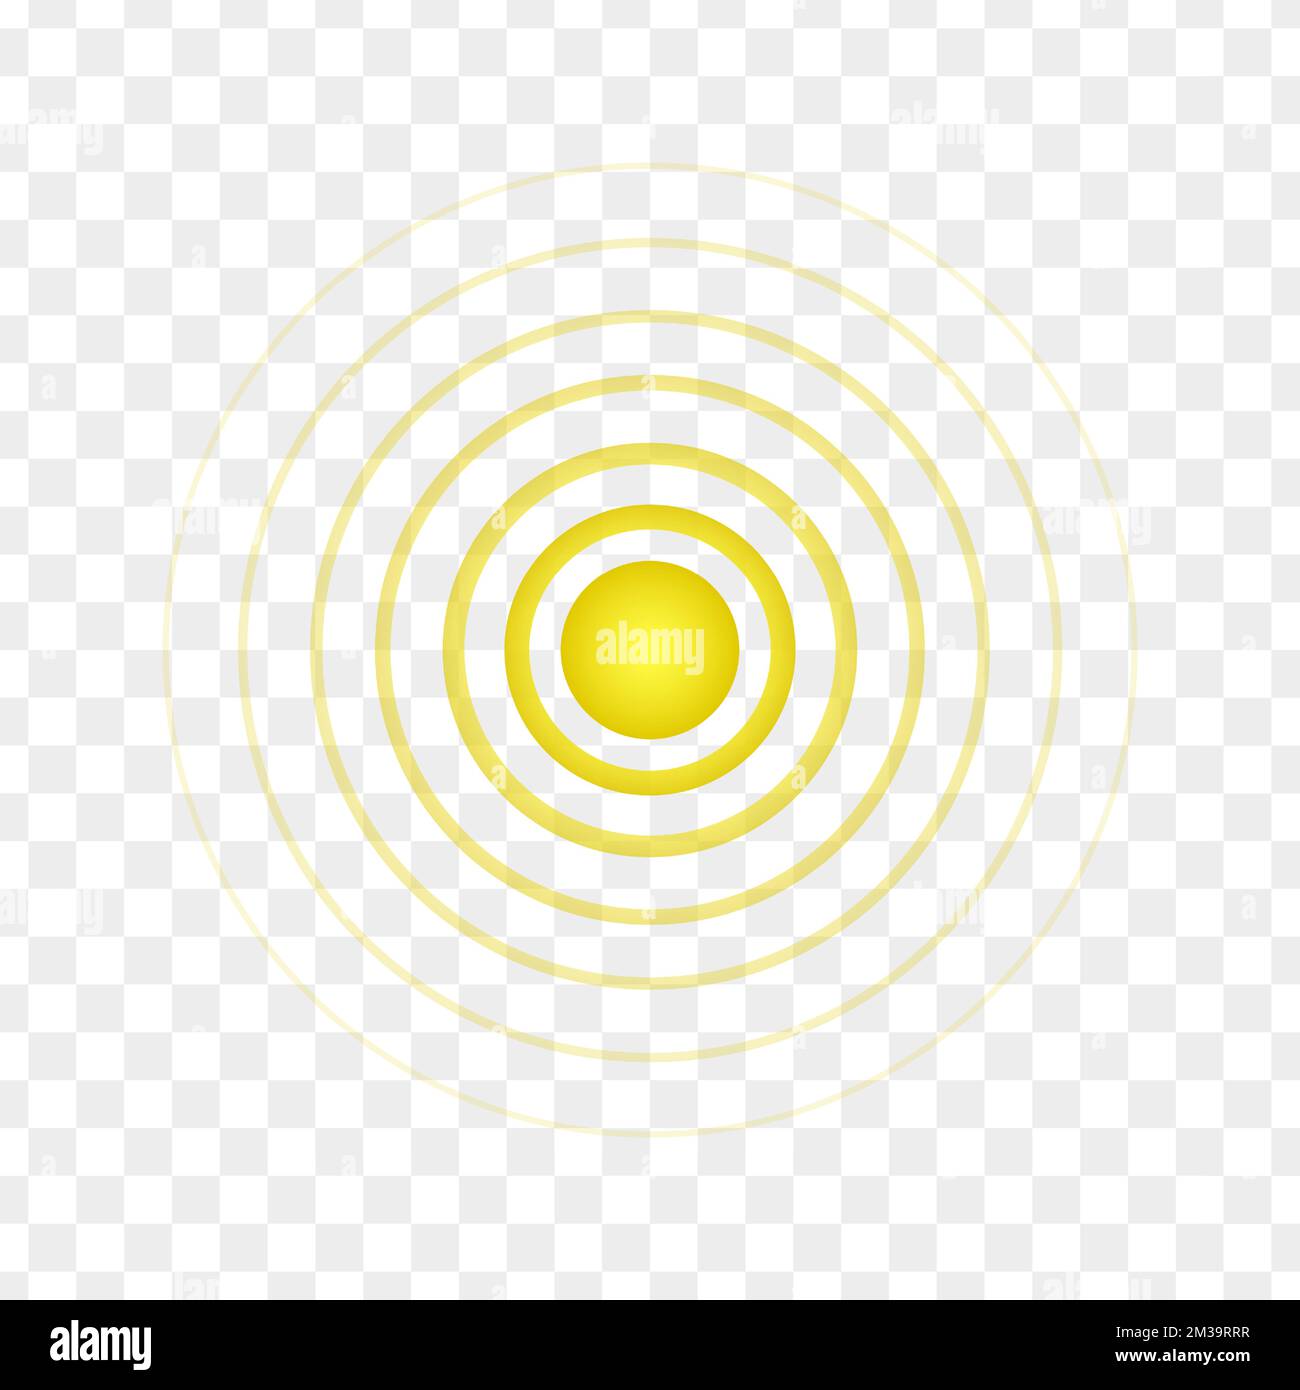 Yellow point with concentric circles. Symbol of aim, target, pain, healing, hurt, painkilling. Round localization icon. Radar, sound or sonar wave sign on transparent background. Vector illustration Stock Vector